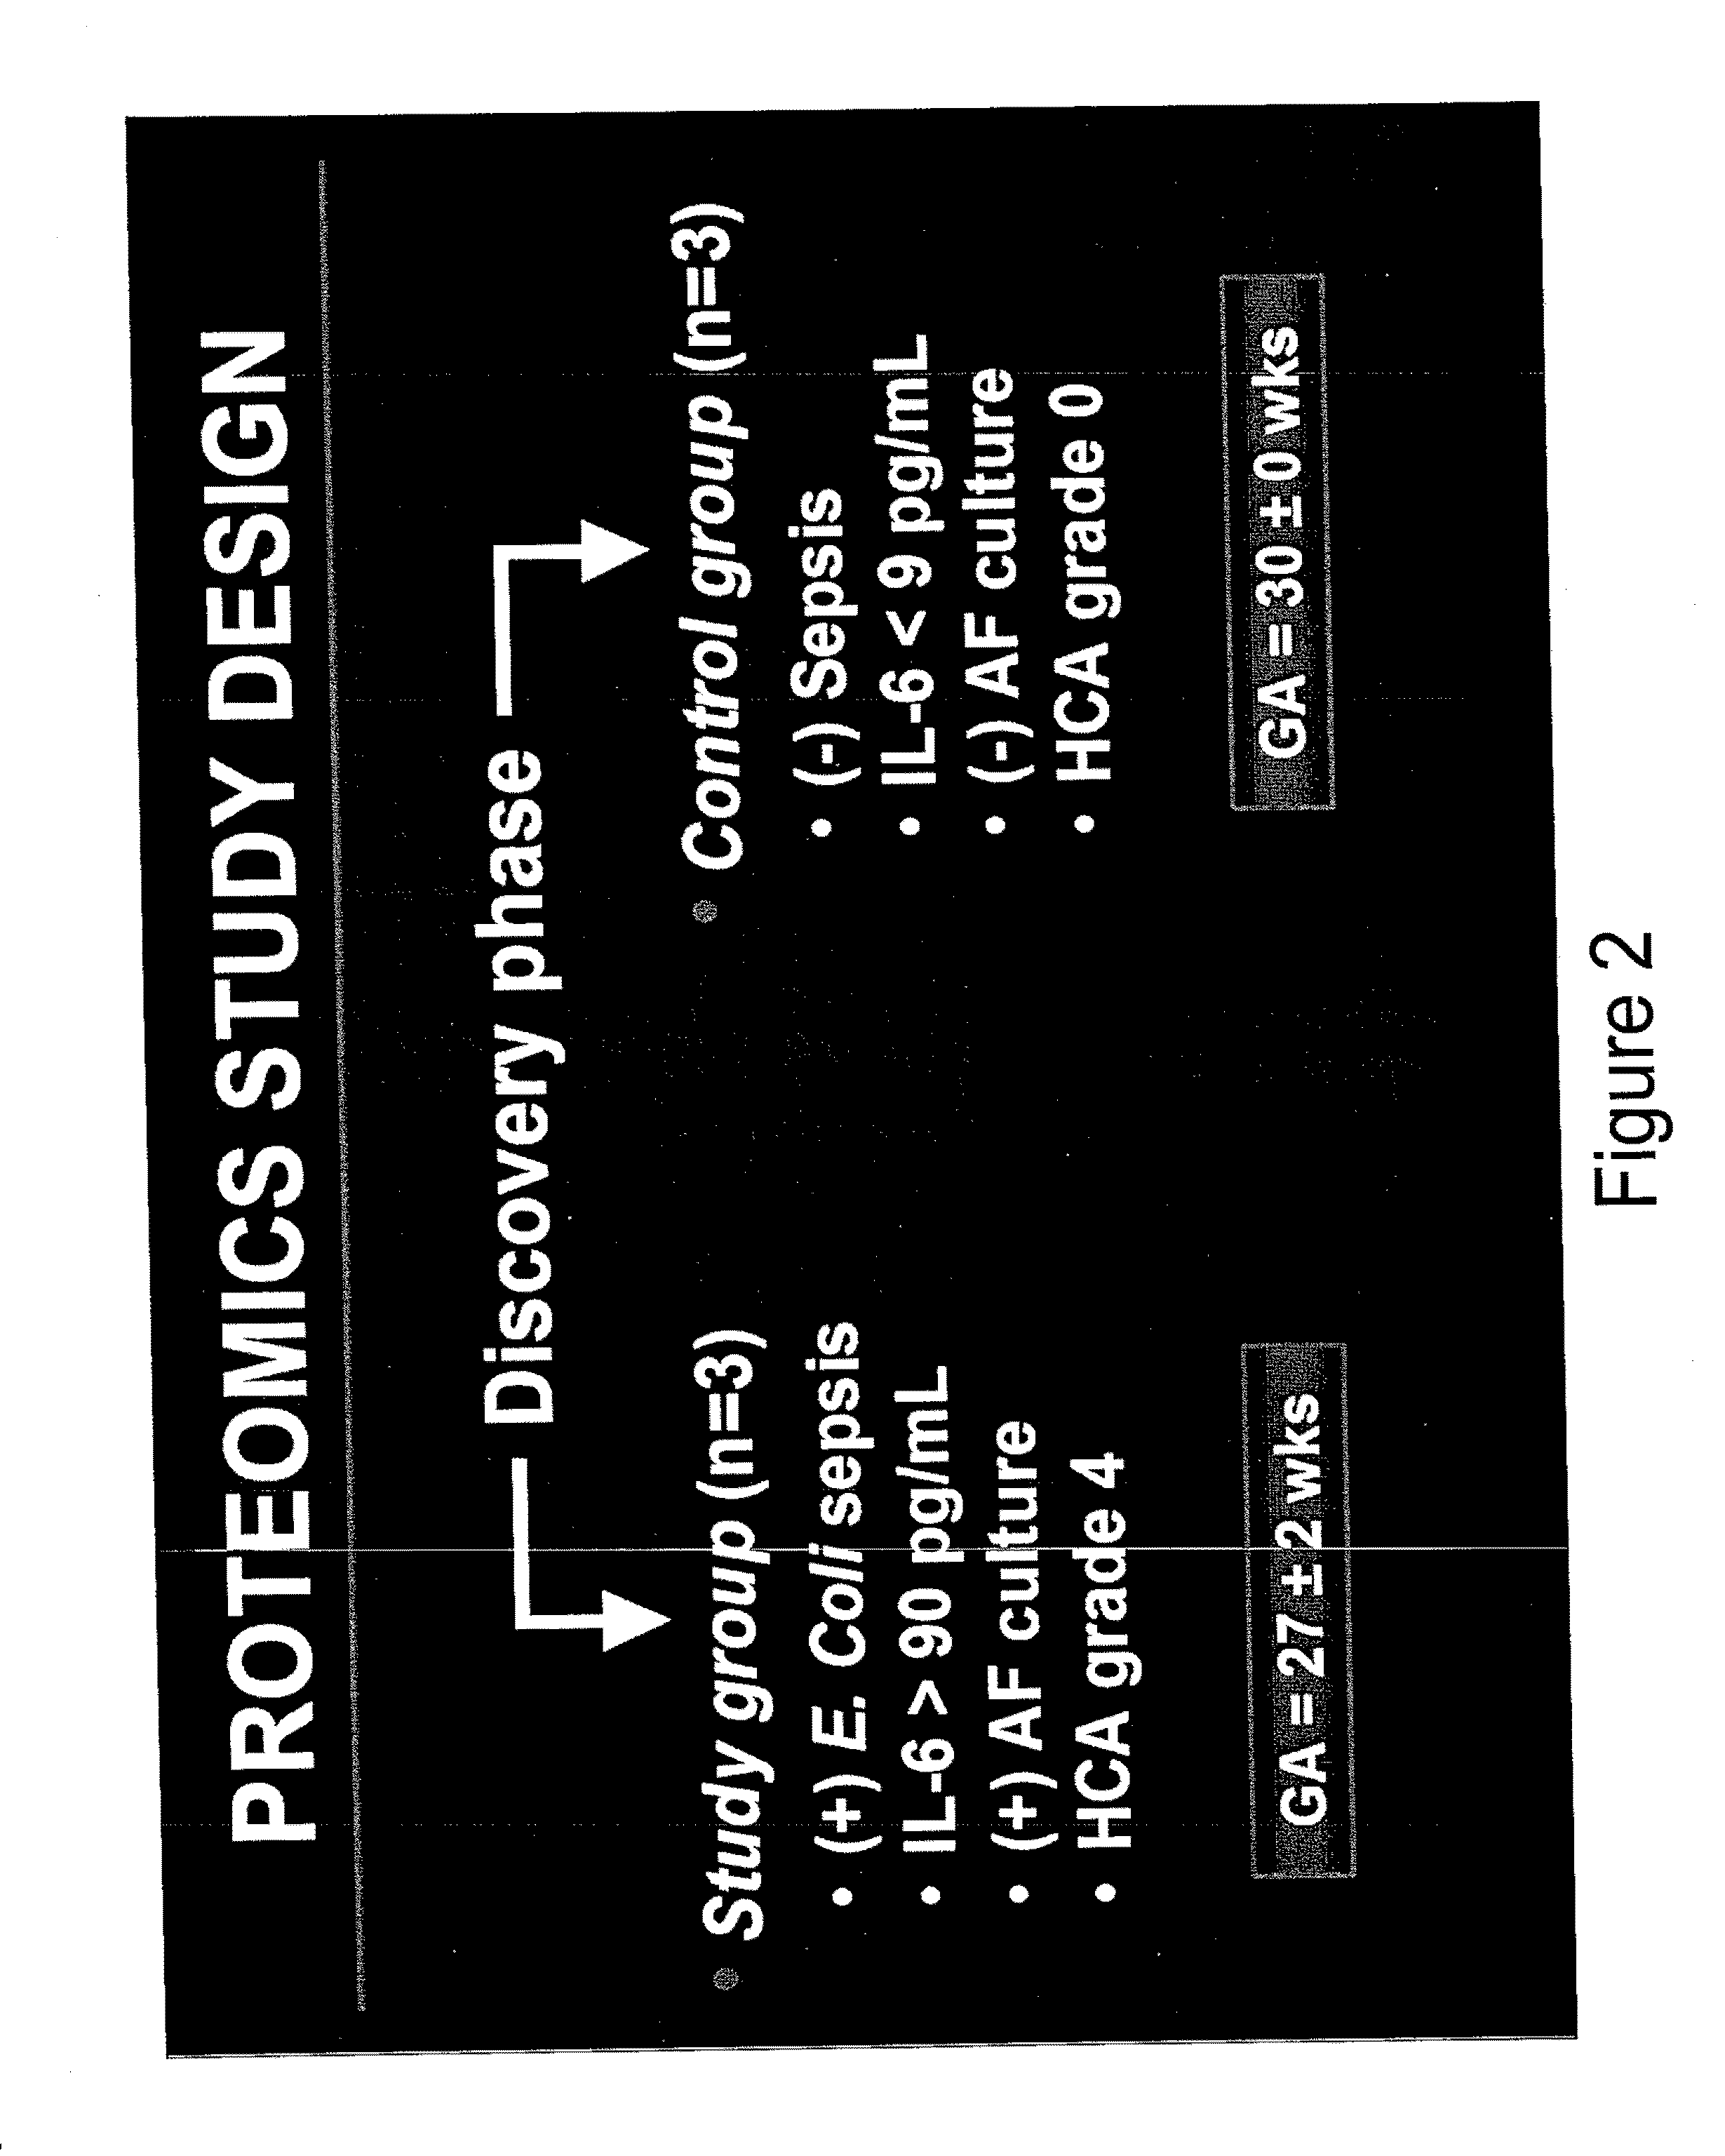 Markers for detection of complications resulting from in utero encounters